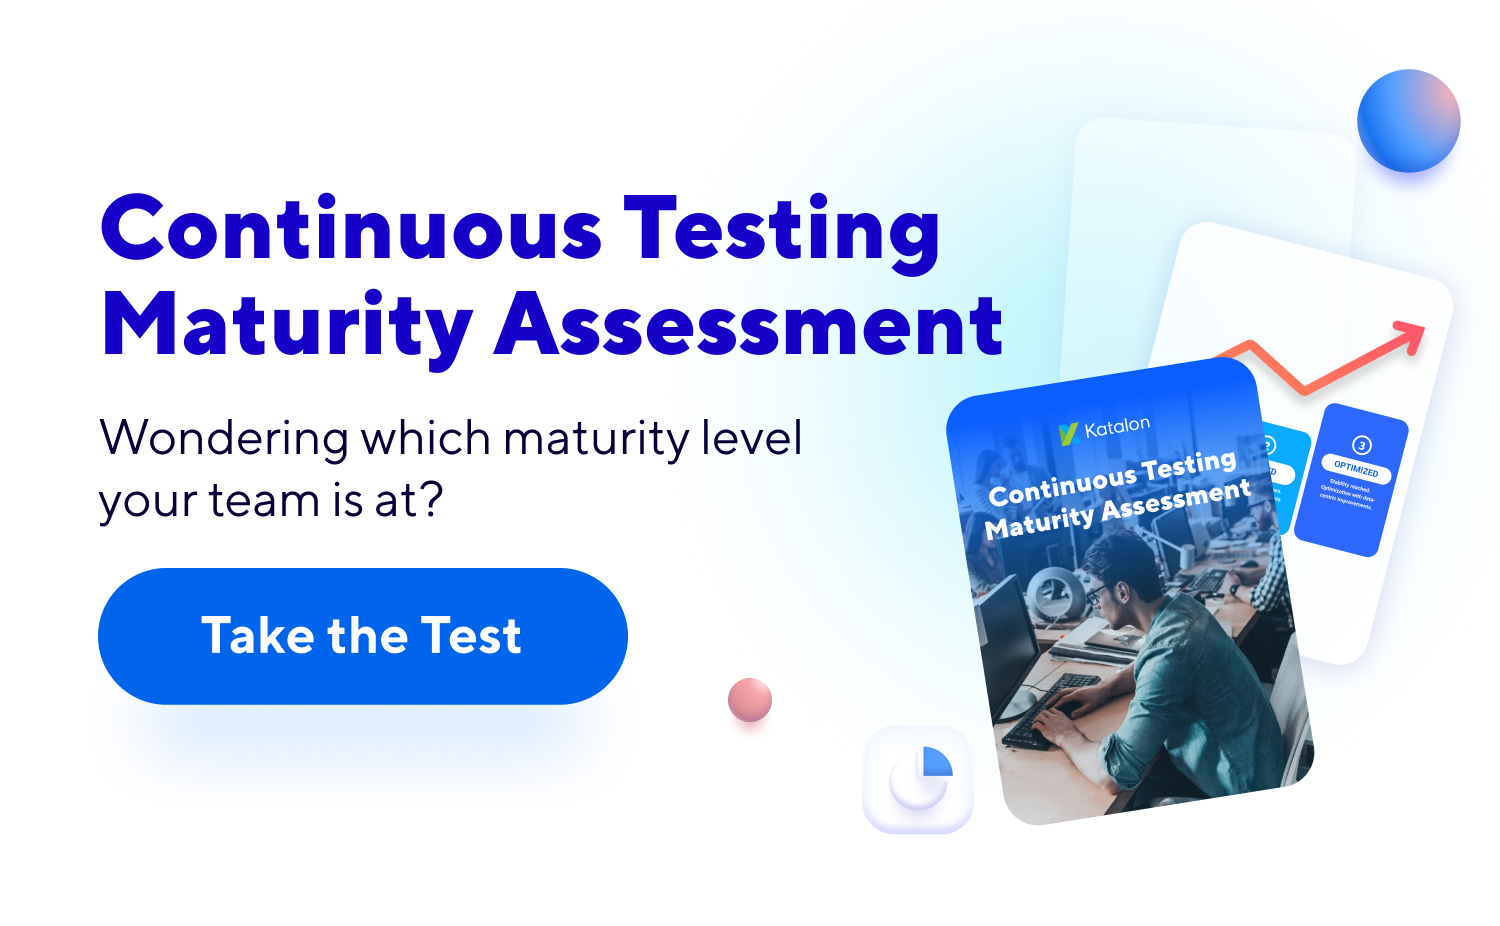 Continuous testing self assessment